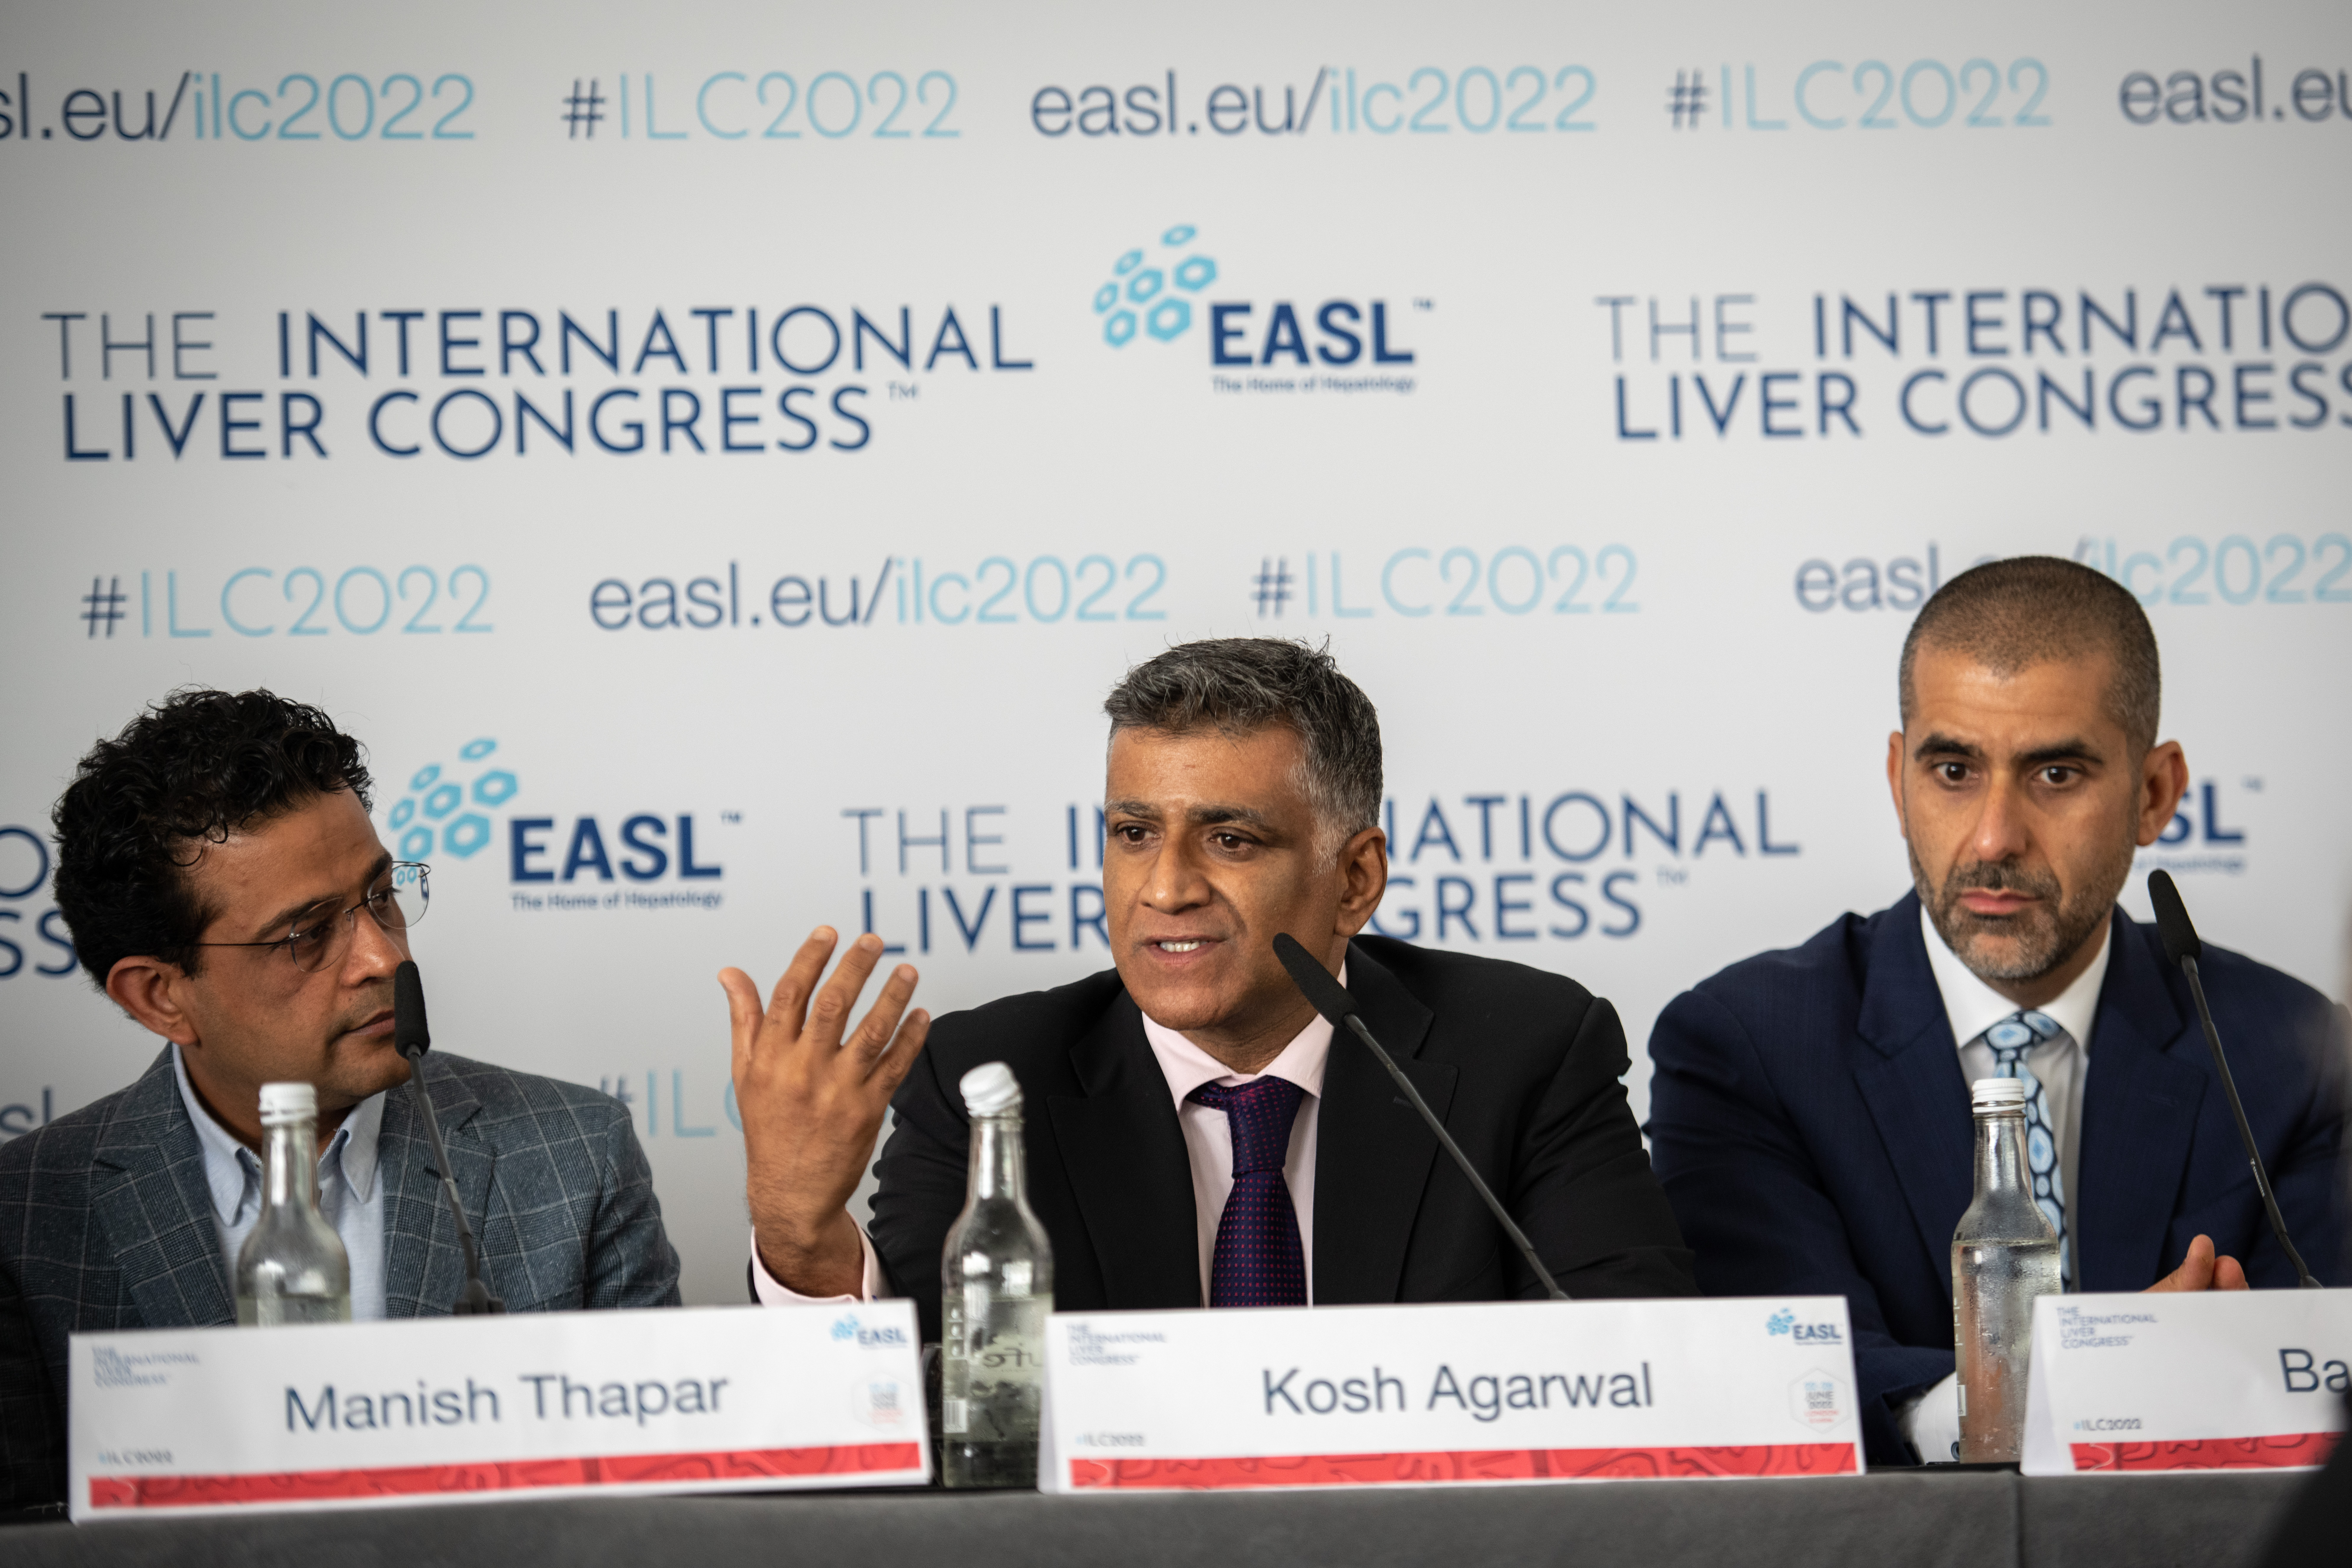 Dr Kosh Agarwal discusses results of the REEF-2 study at the International LIver Congress. Photo © Steve Forrest & Andrew McConnell / EASL.